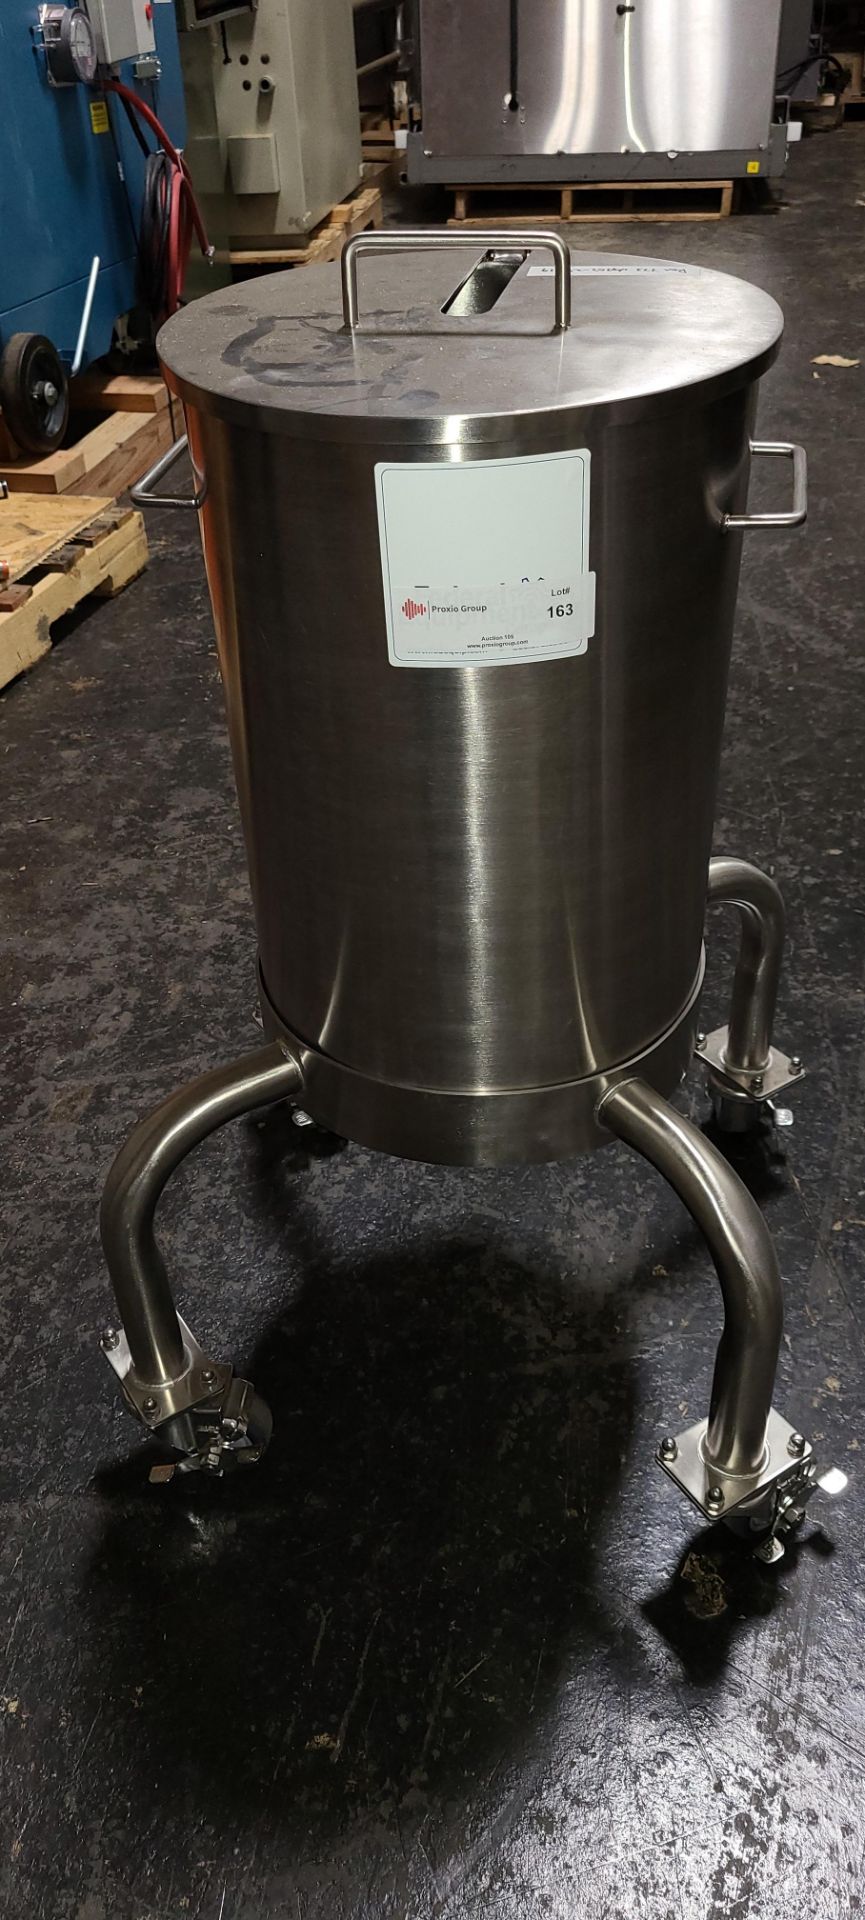 8 gallon stainless steel portable tank - Image 5 of 5